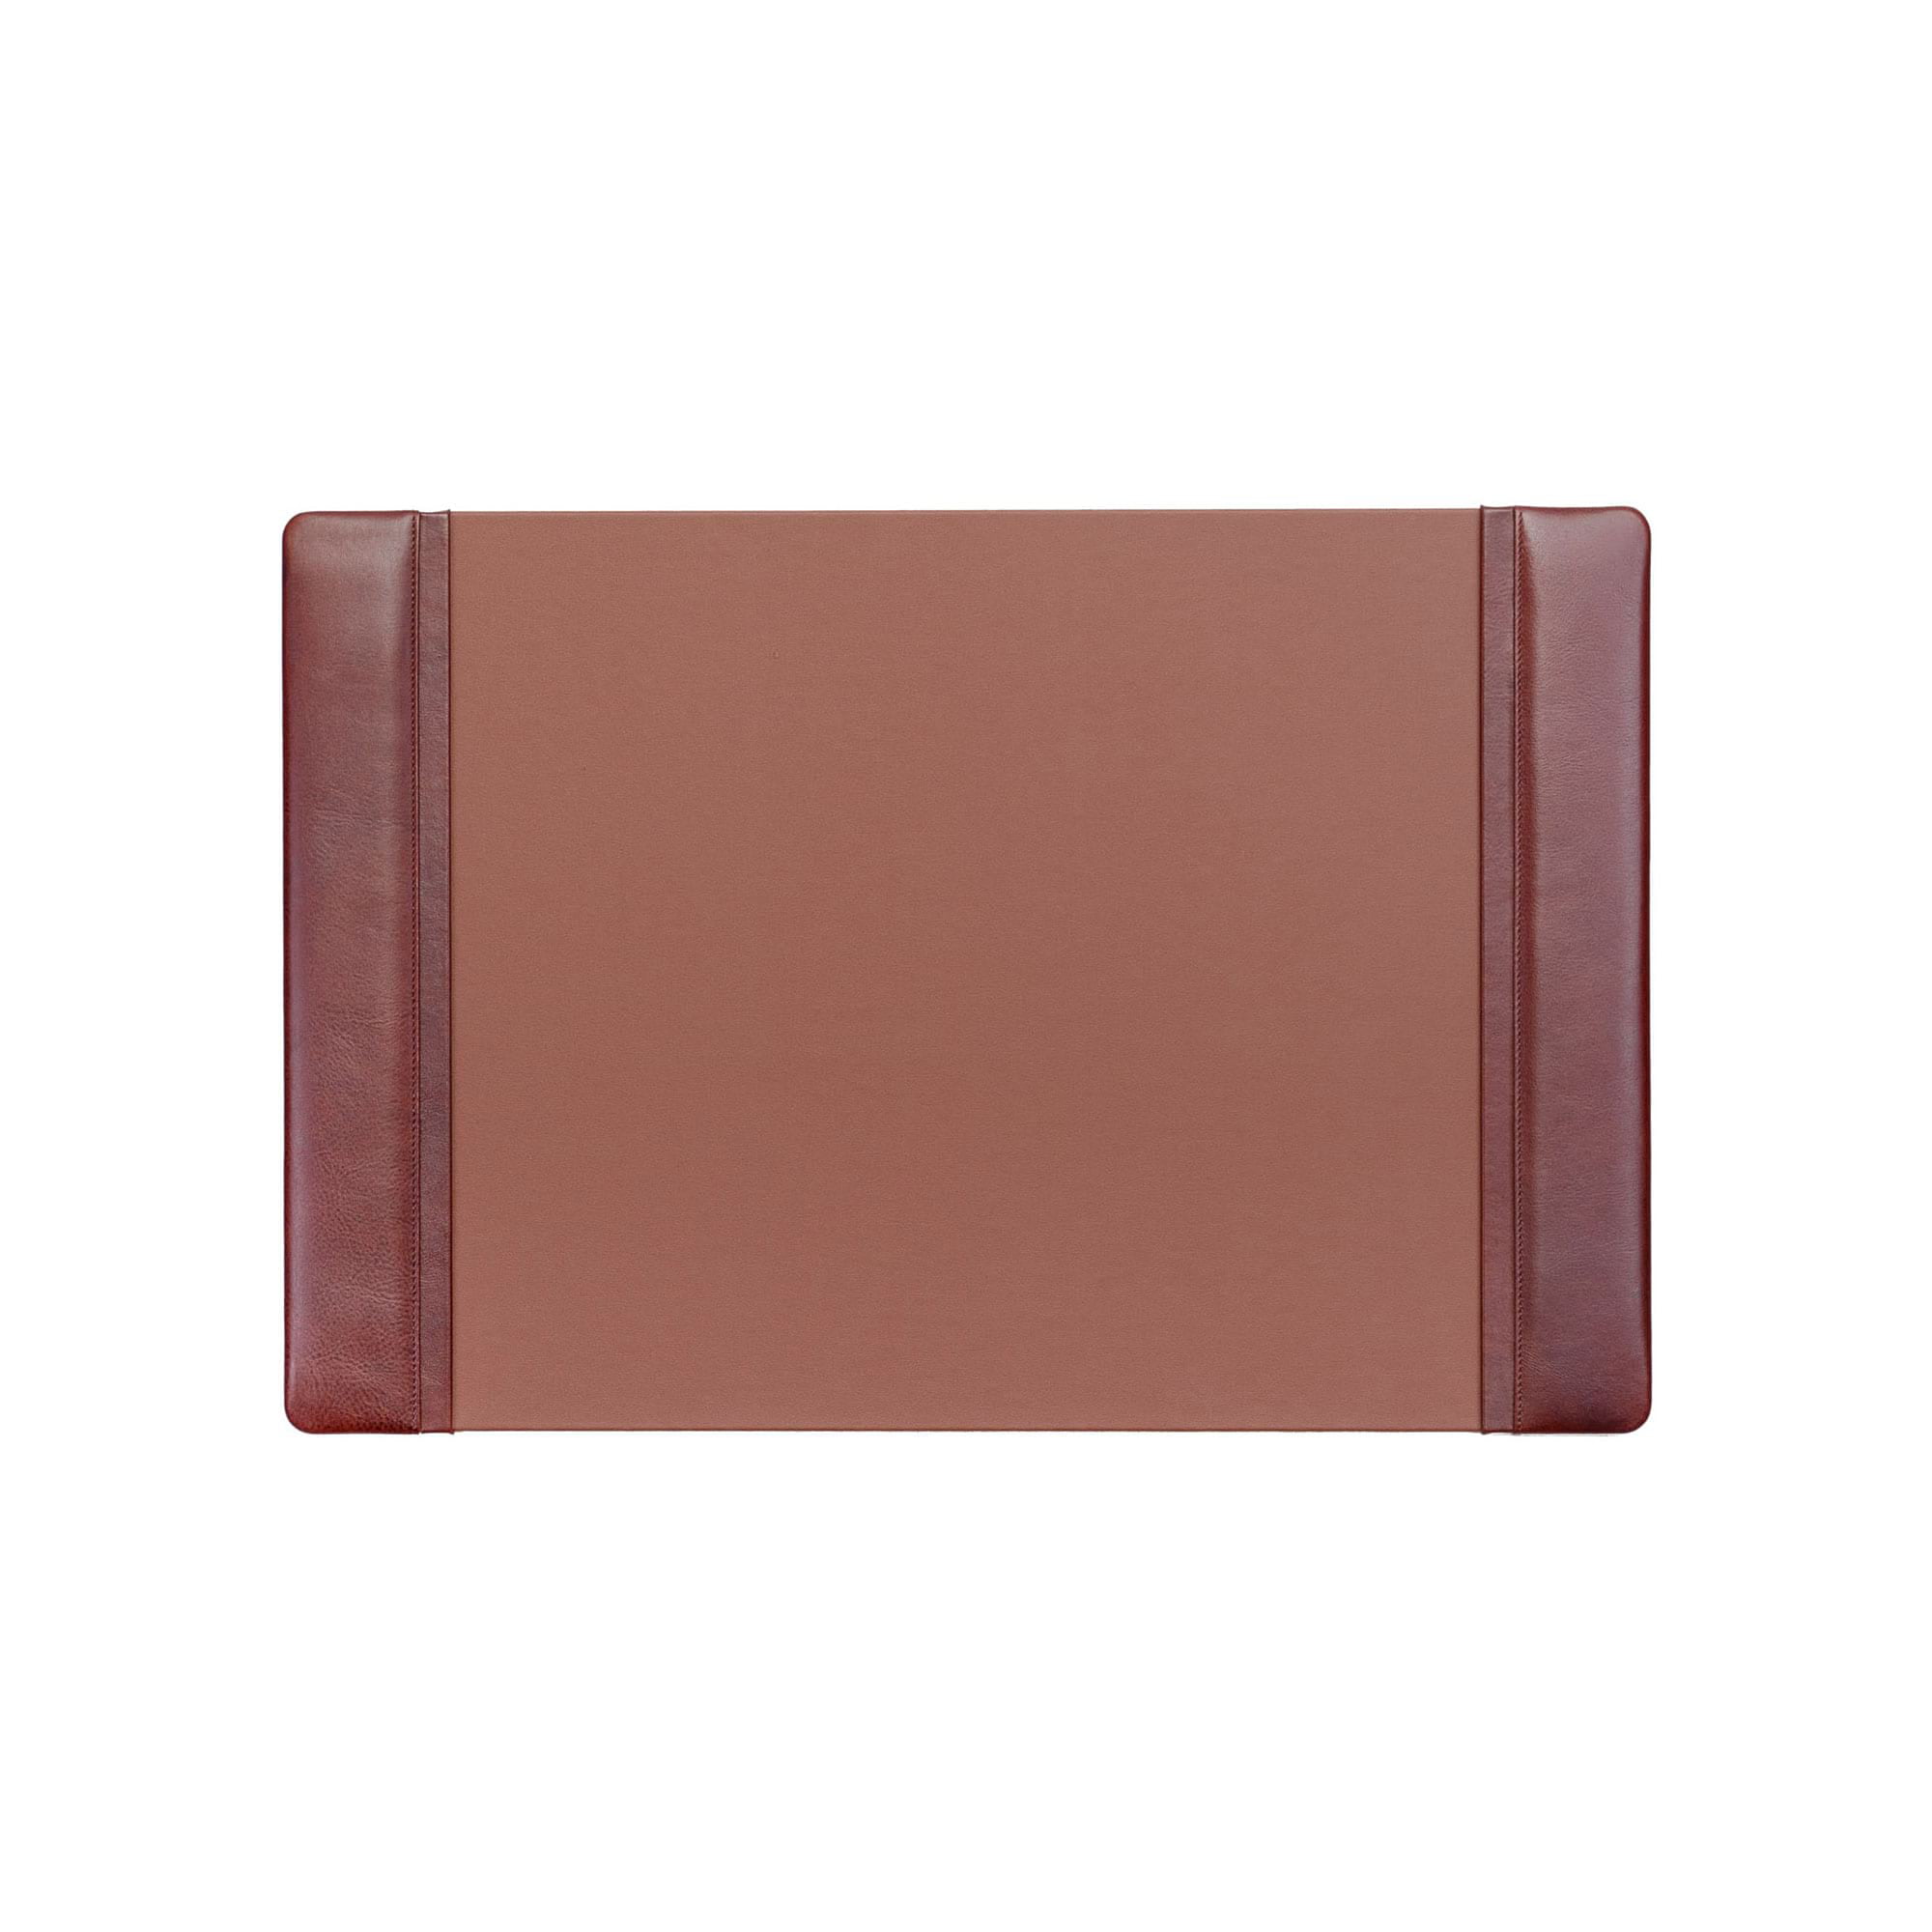 Dacasso Burgundy Desk Pad with Side-Rails,22 by 14 Inch